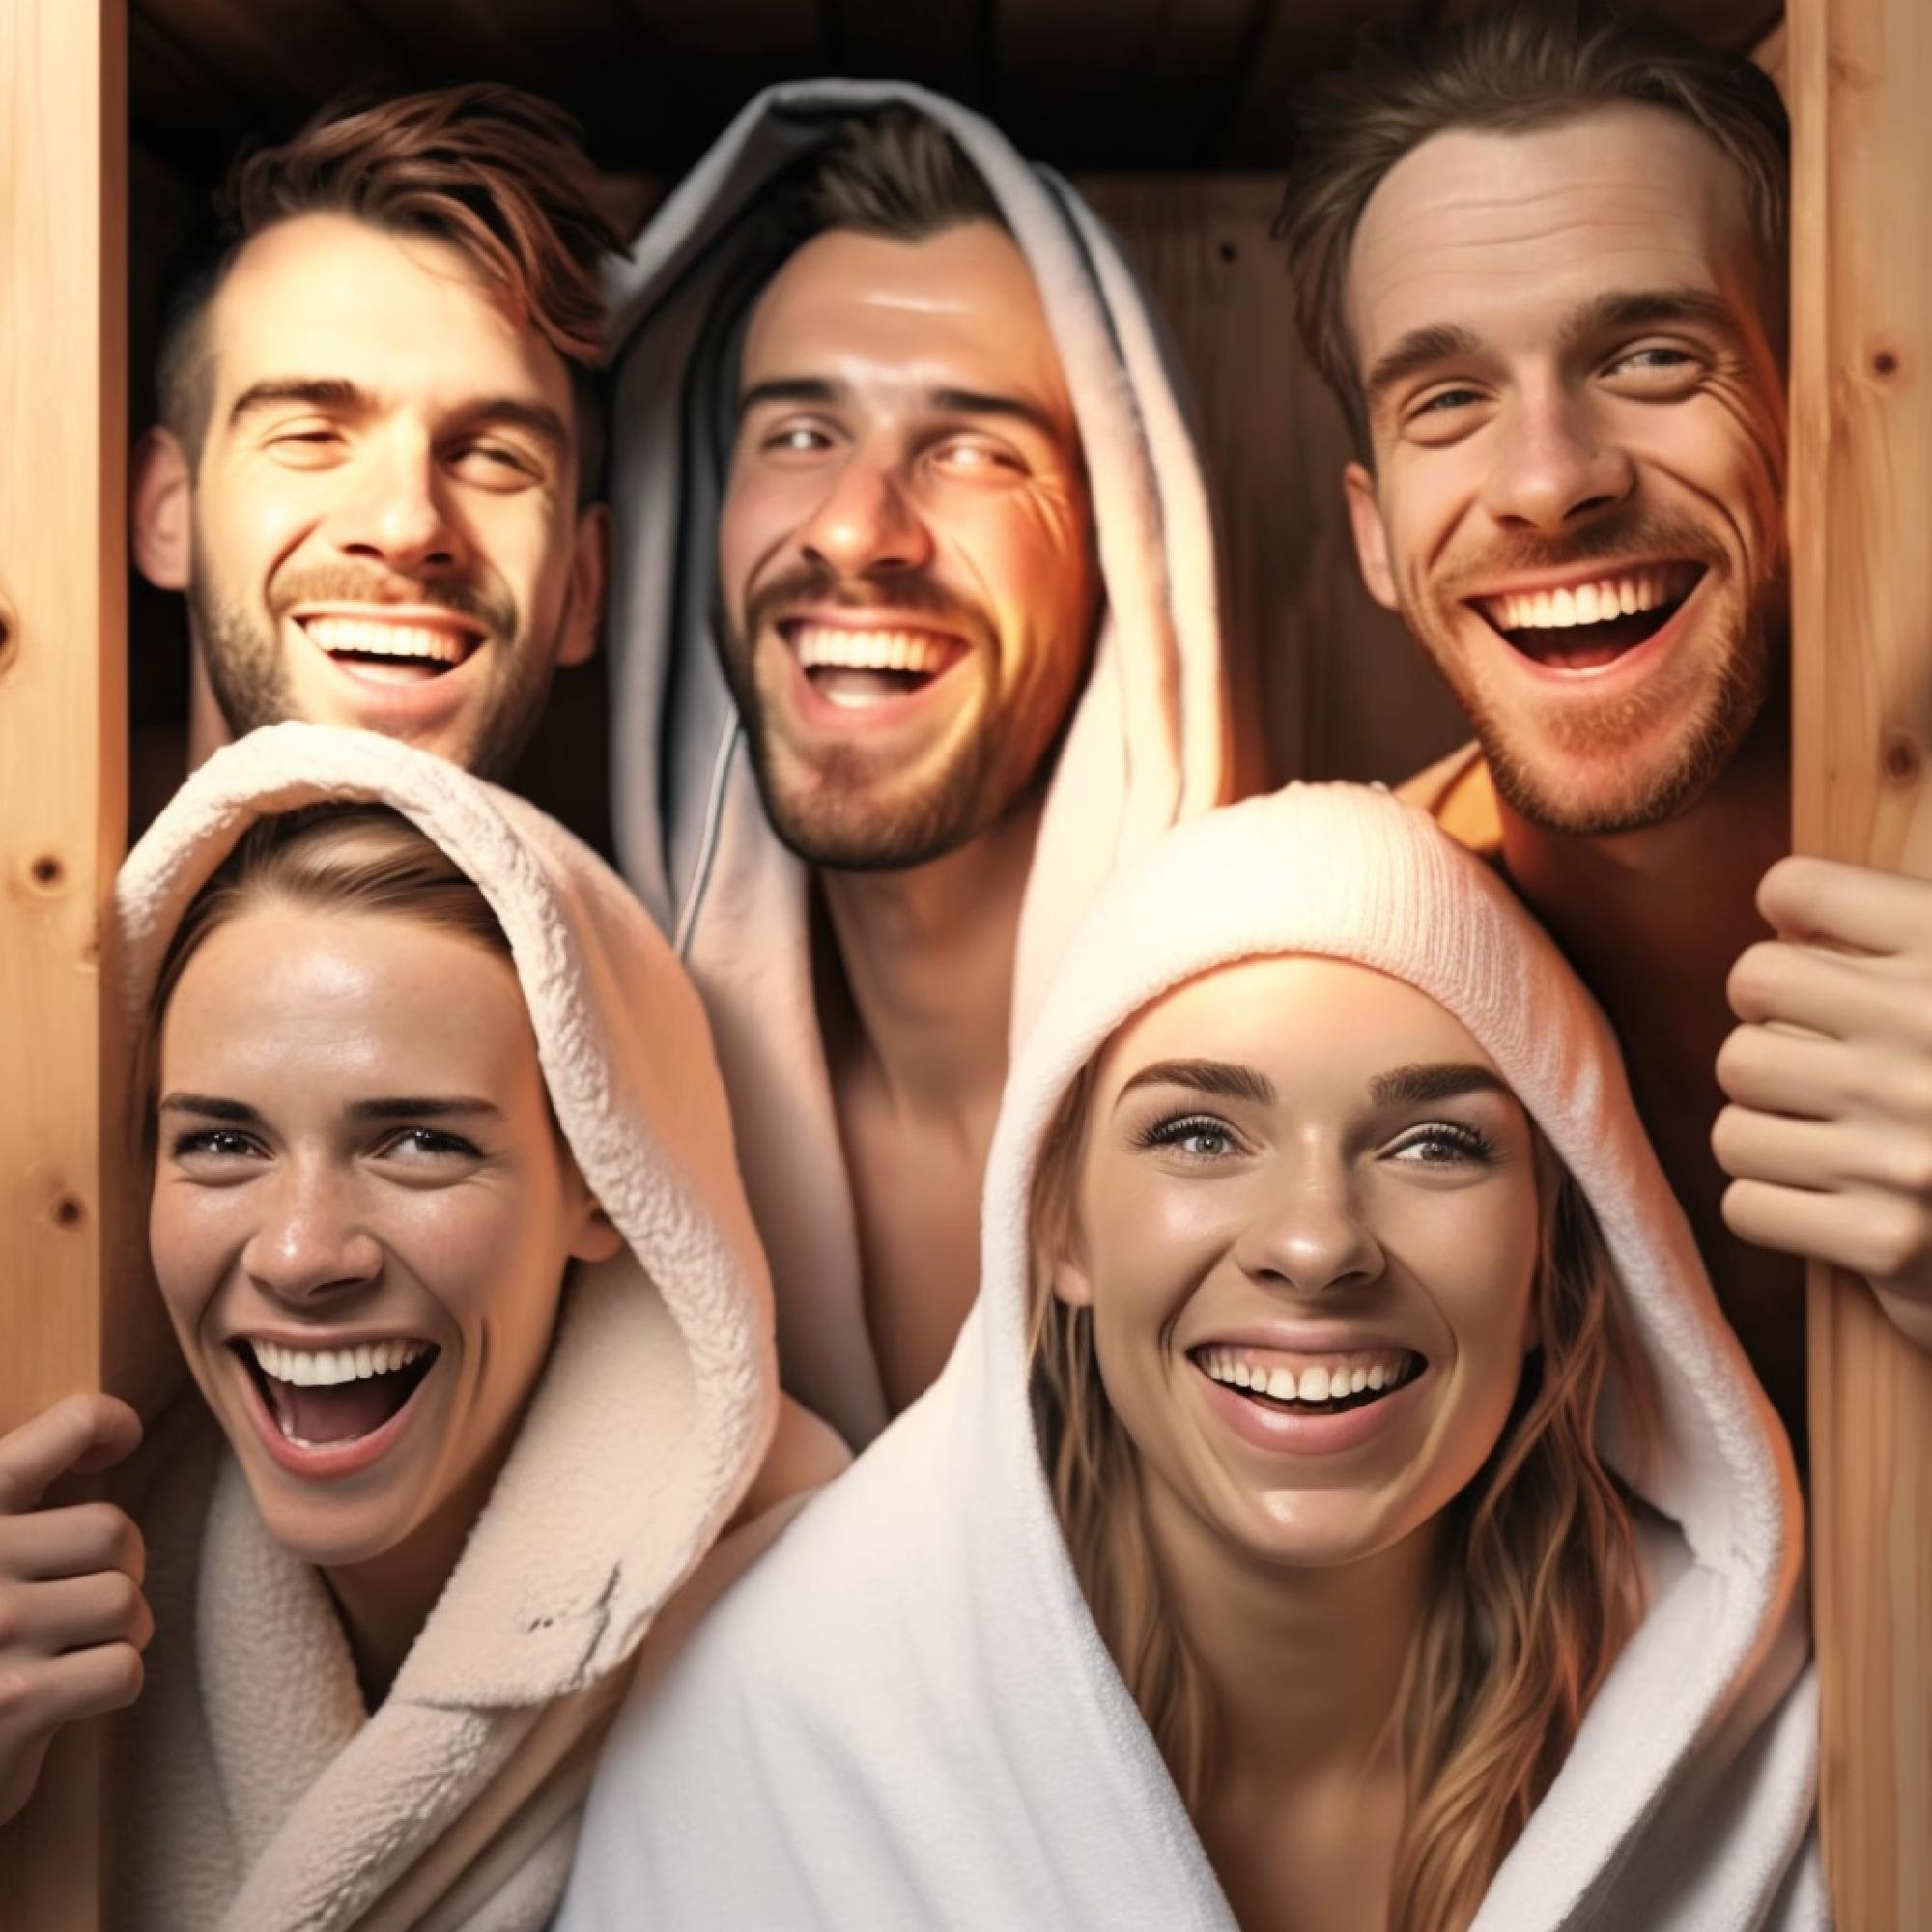 Berlin news - Scientists prove that using a spa increases life happiness